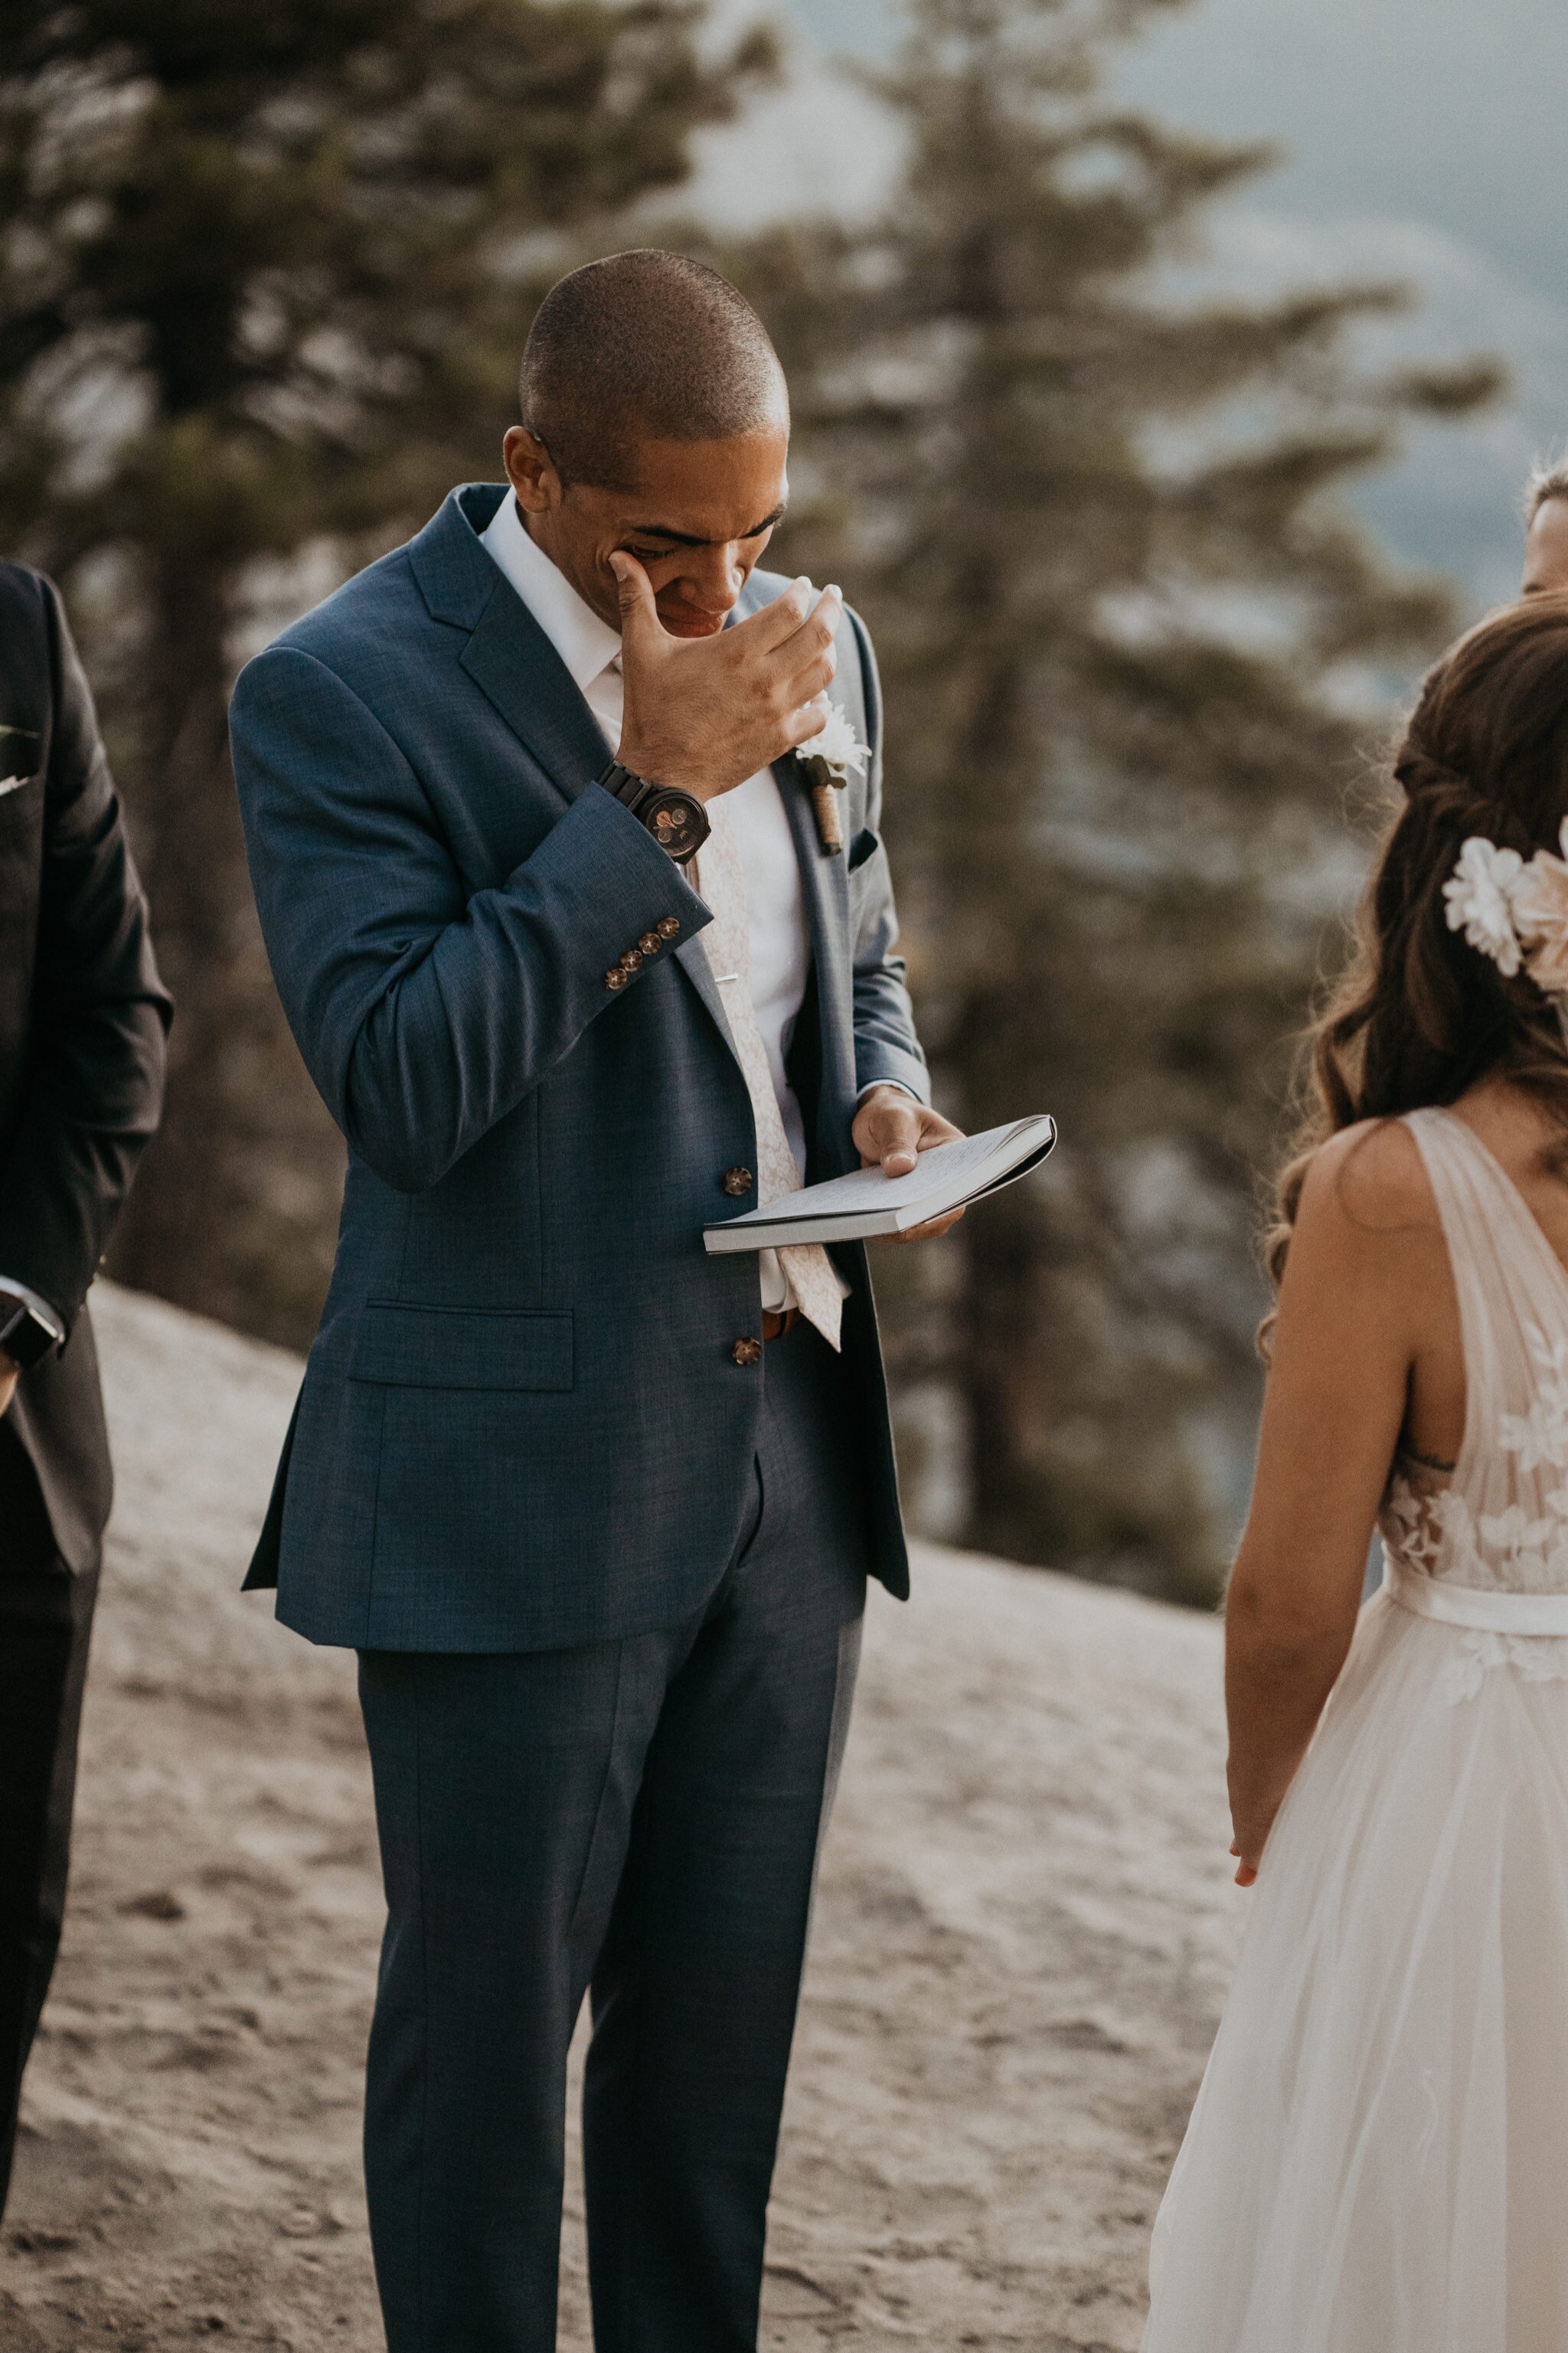 Groom crying | Yosemite National Park elopement and wedding photos at Glacier Point during sunrise with view of Half Dome